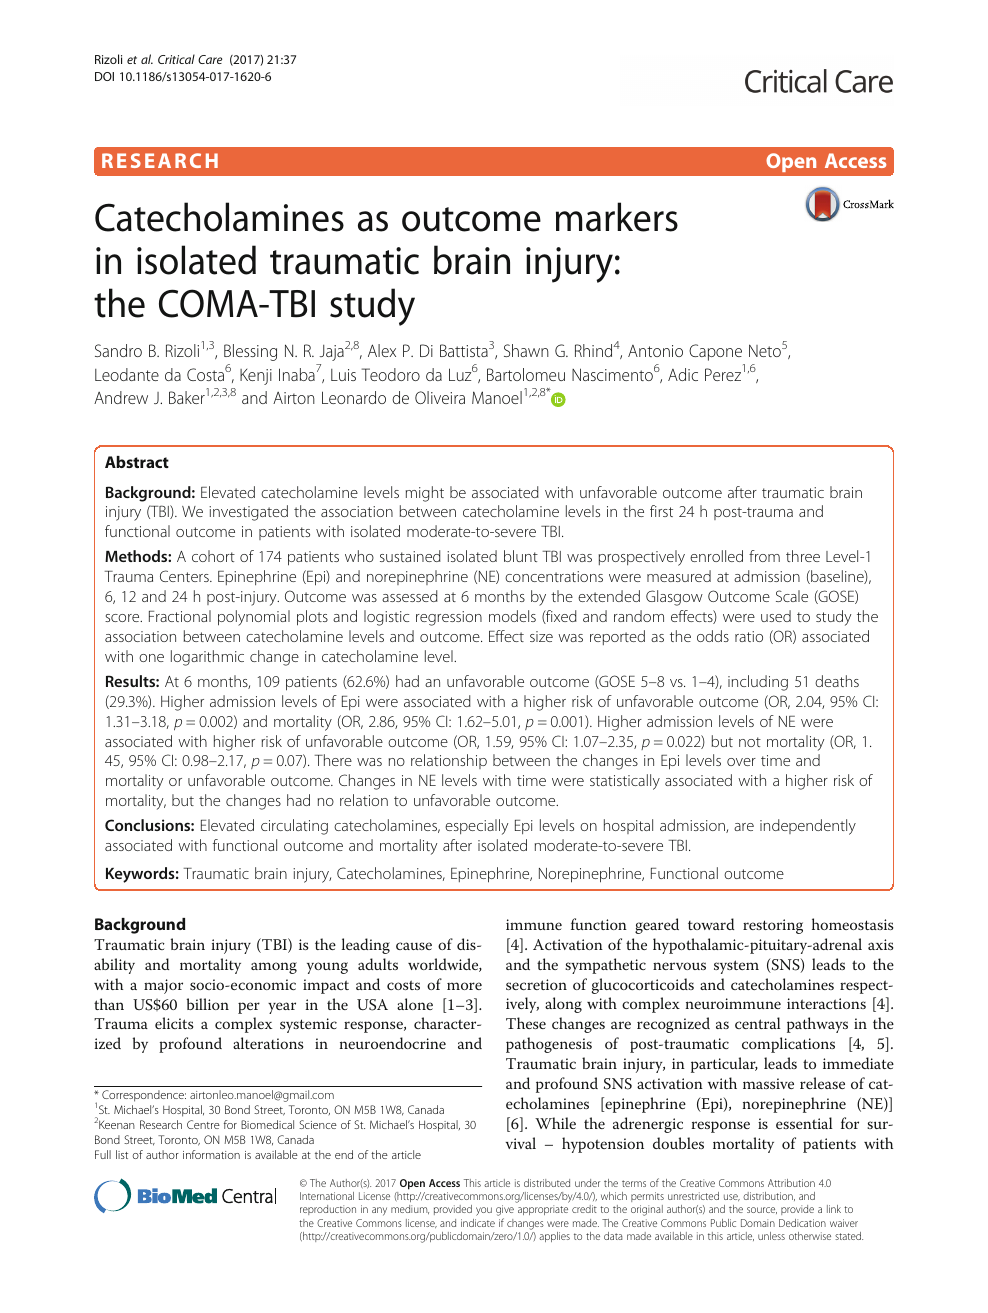 Catecholamines As Outcome Markers In Isolated Traumatic Brain Injury The Coma Tbi Study Topic Of Research Paper In Clinical Medicine Download Scholarly Article Pdf And Read For Free On Cyberleninka Open Science